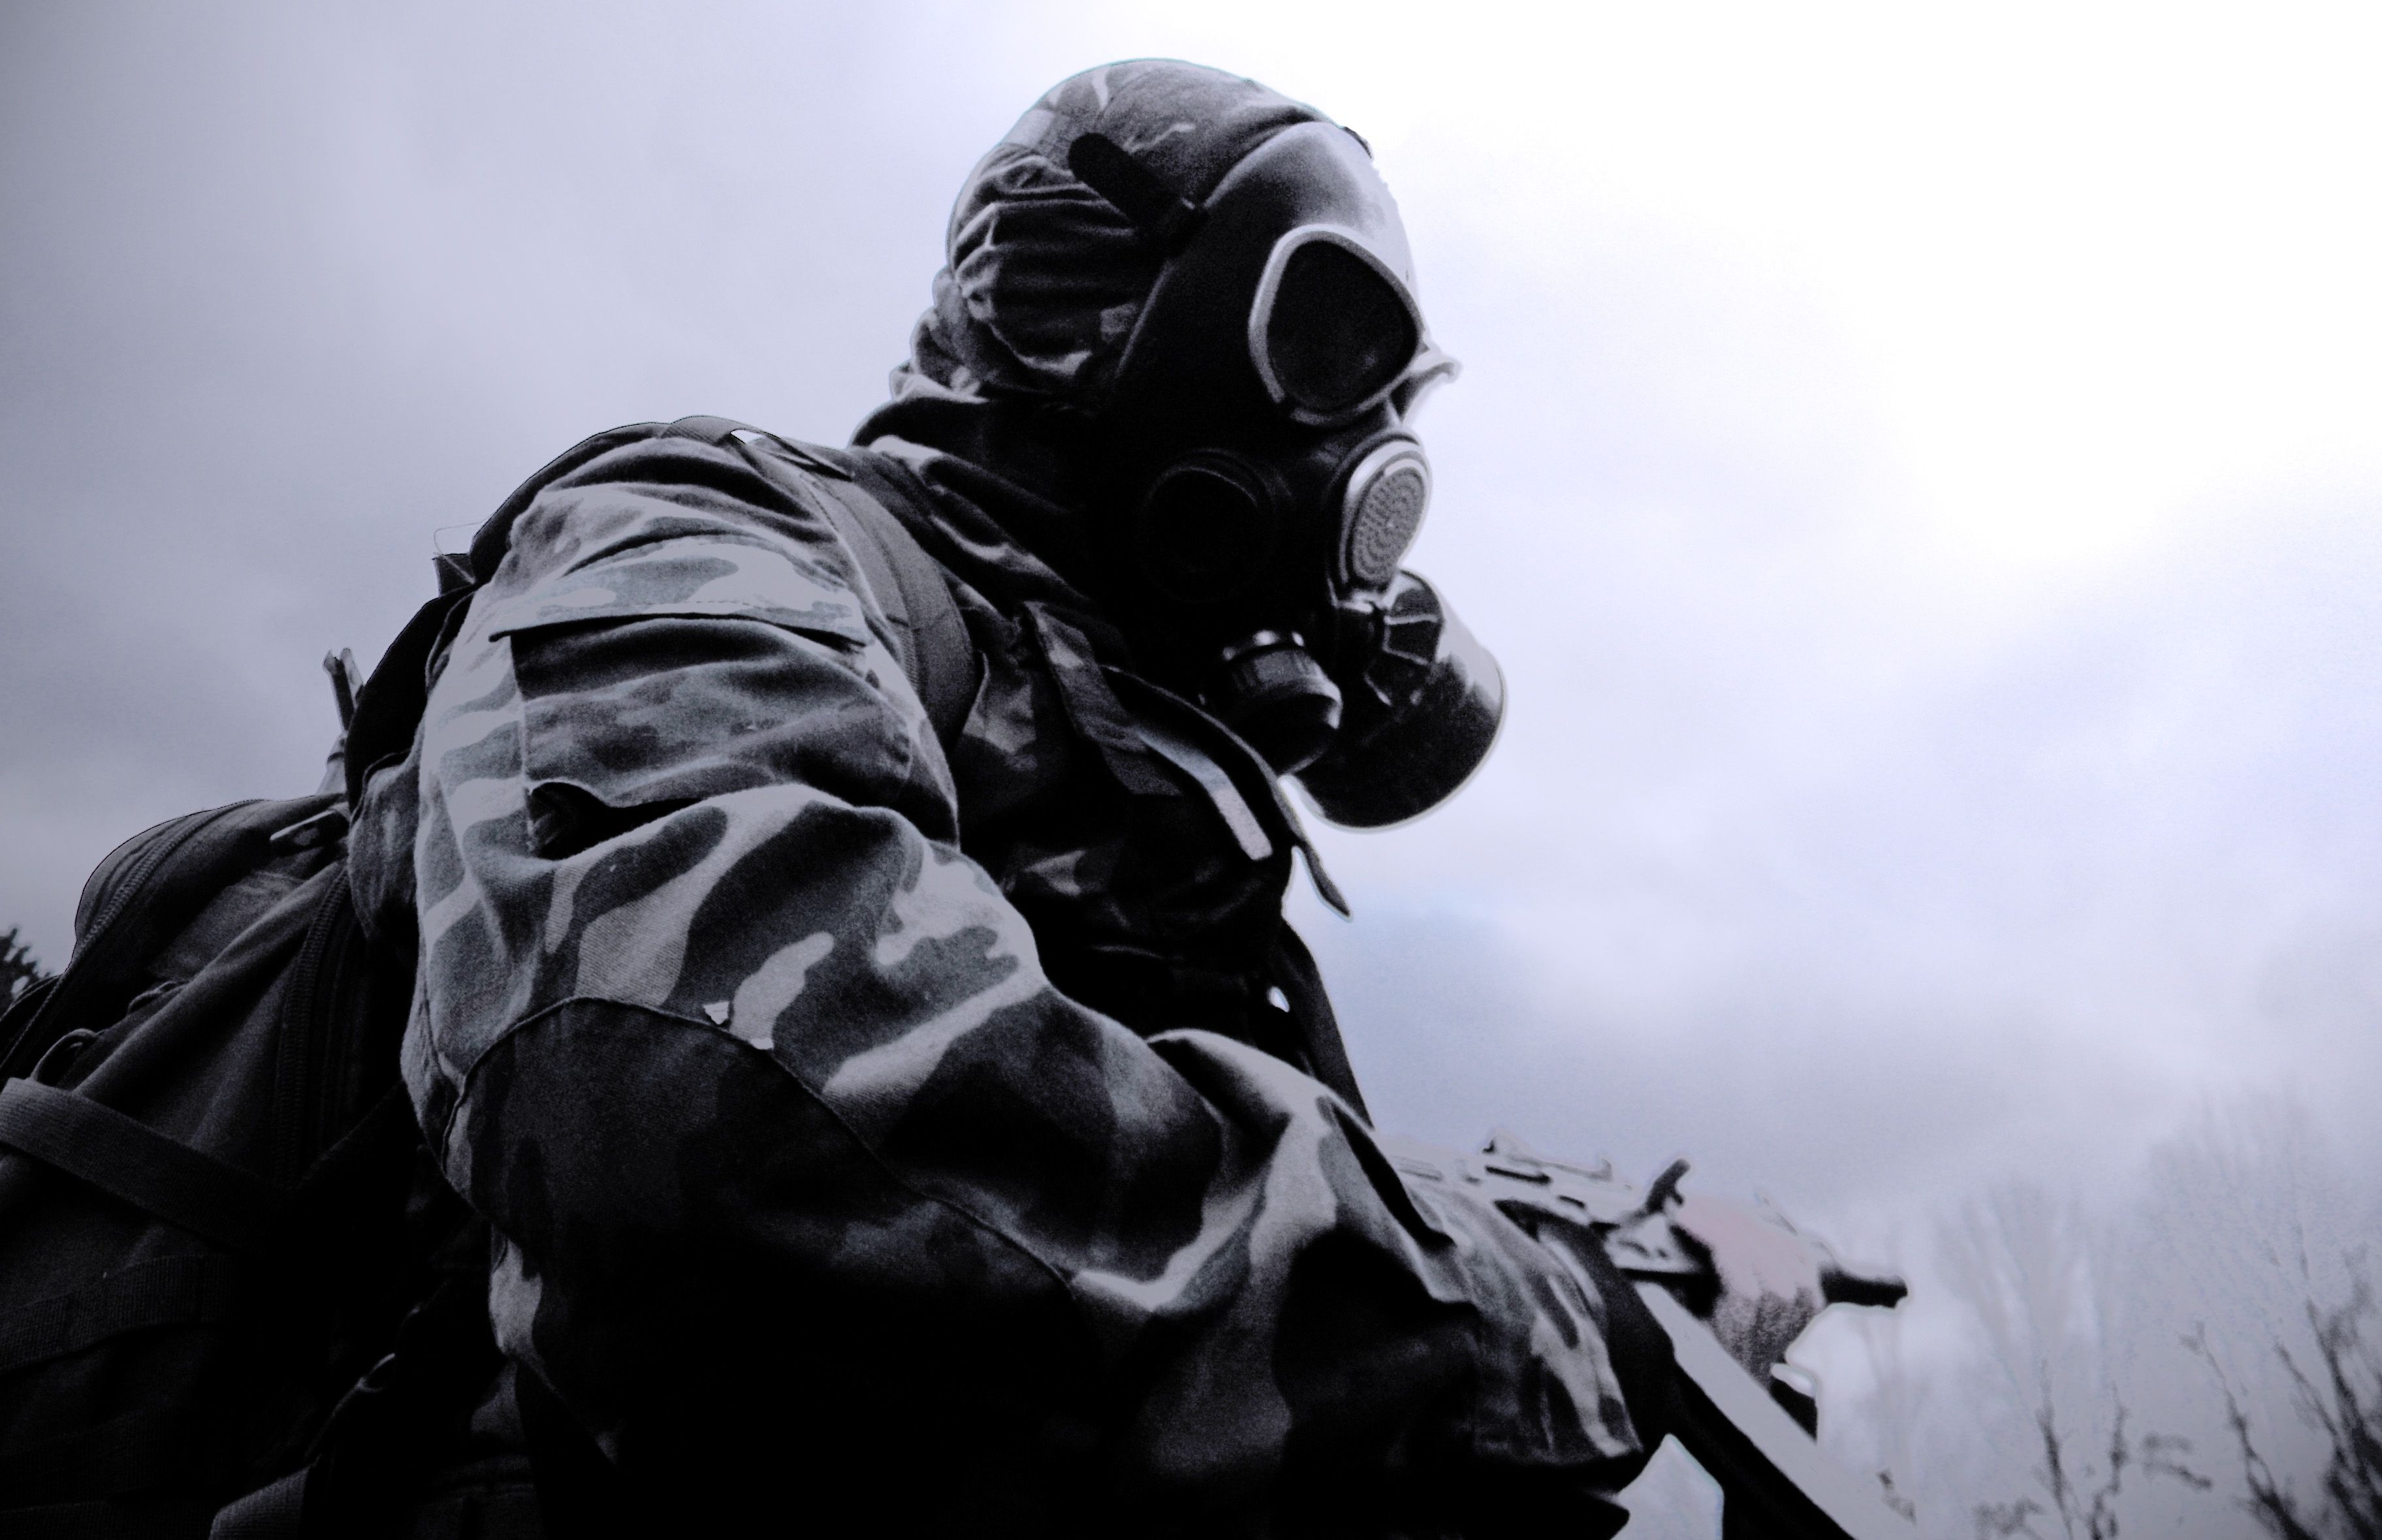 Gas Mask Soldier Wallpaper Free Gas Mask Soldier